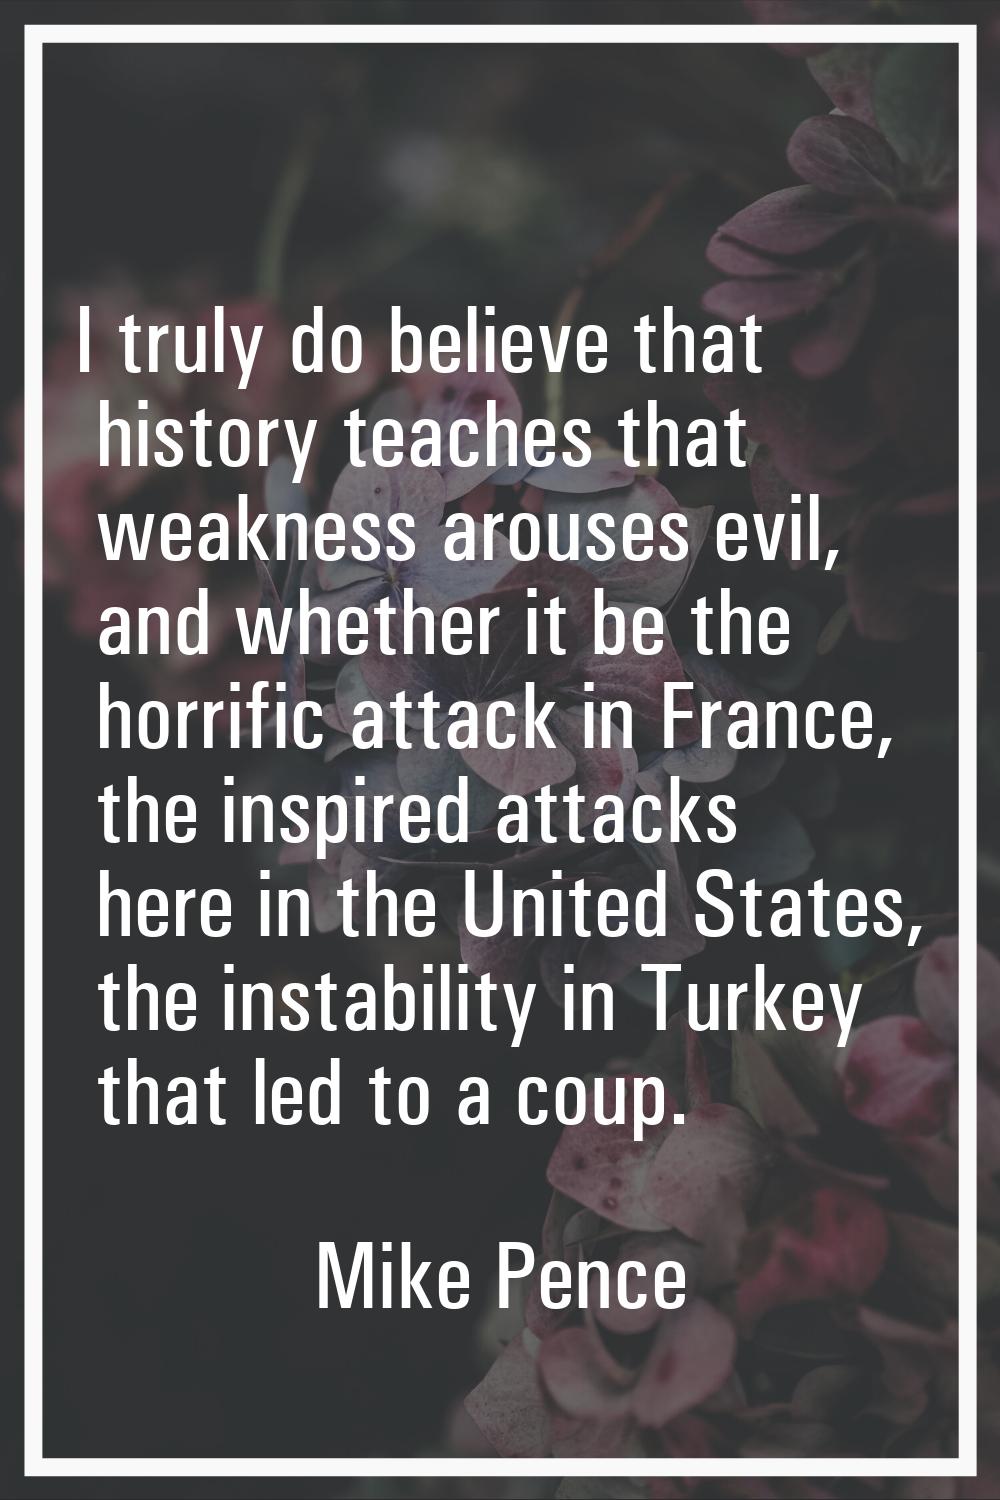 I truly do believe that history teaches that weakness arouses evil, and whether it be the horrific 